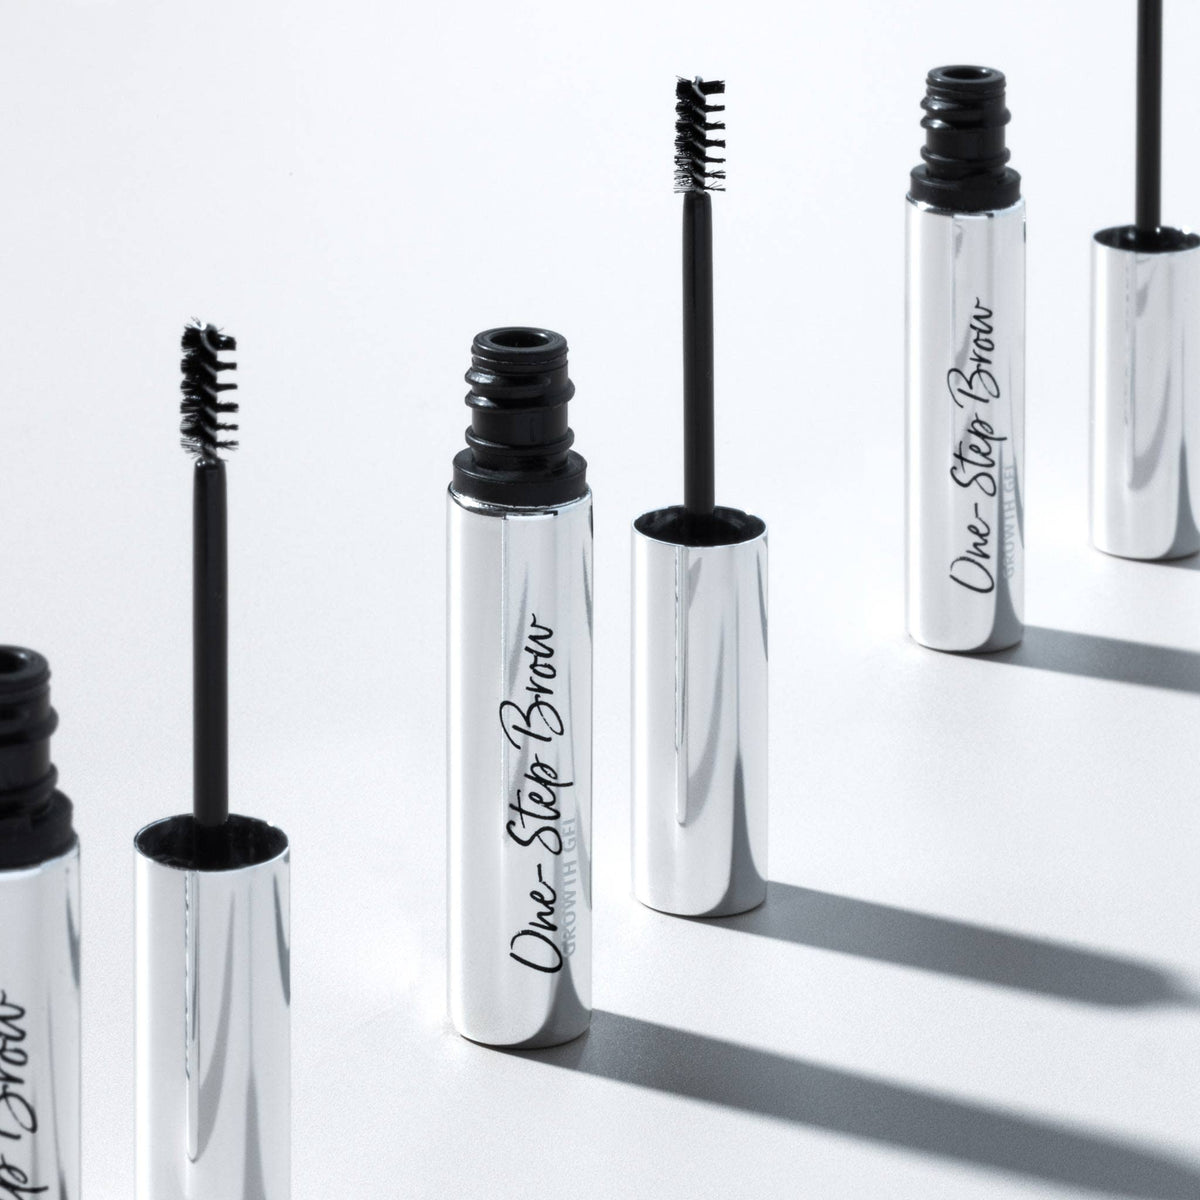 Lune+Aster One-Step Brow Growth Gel . This product is in the color clear